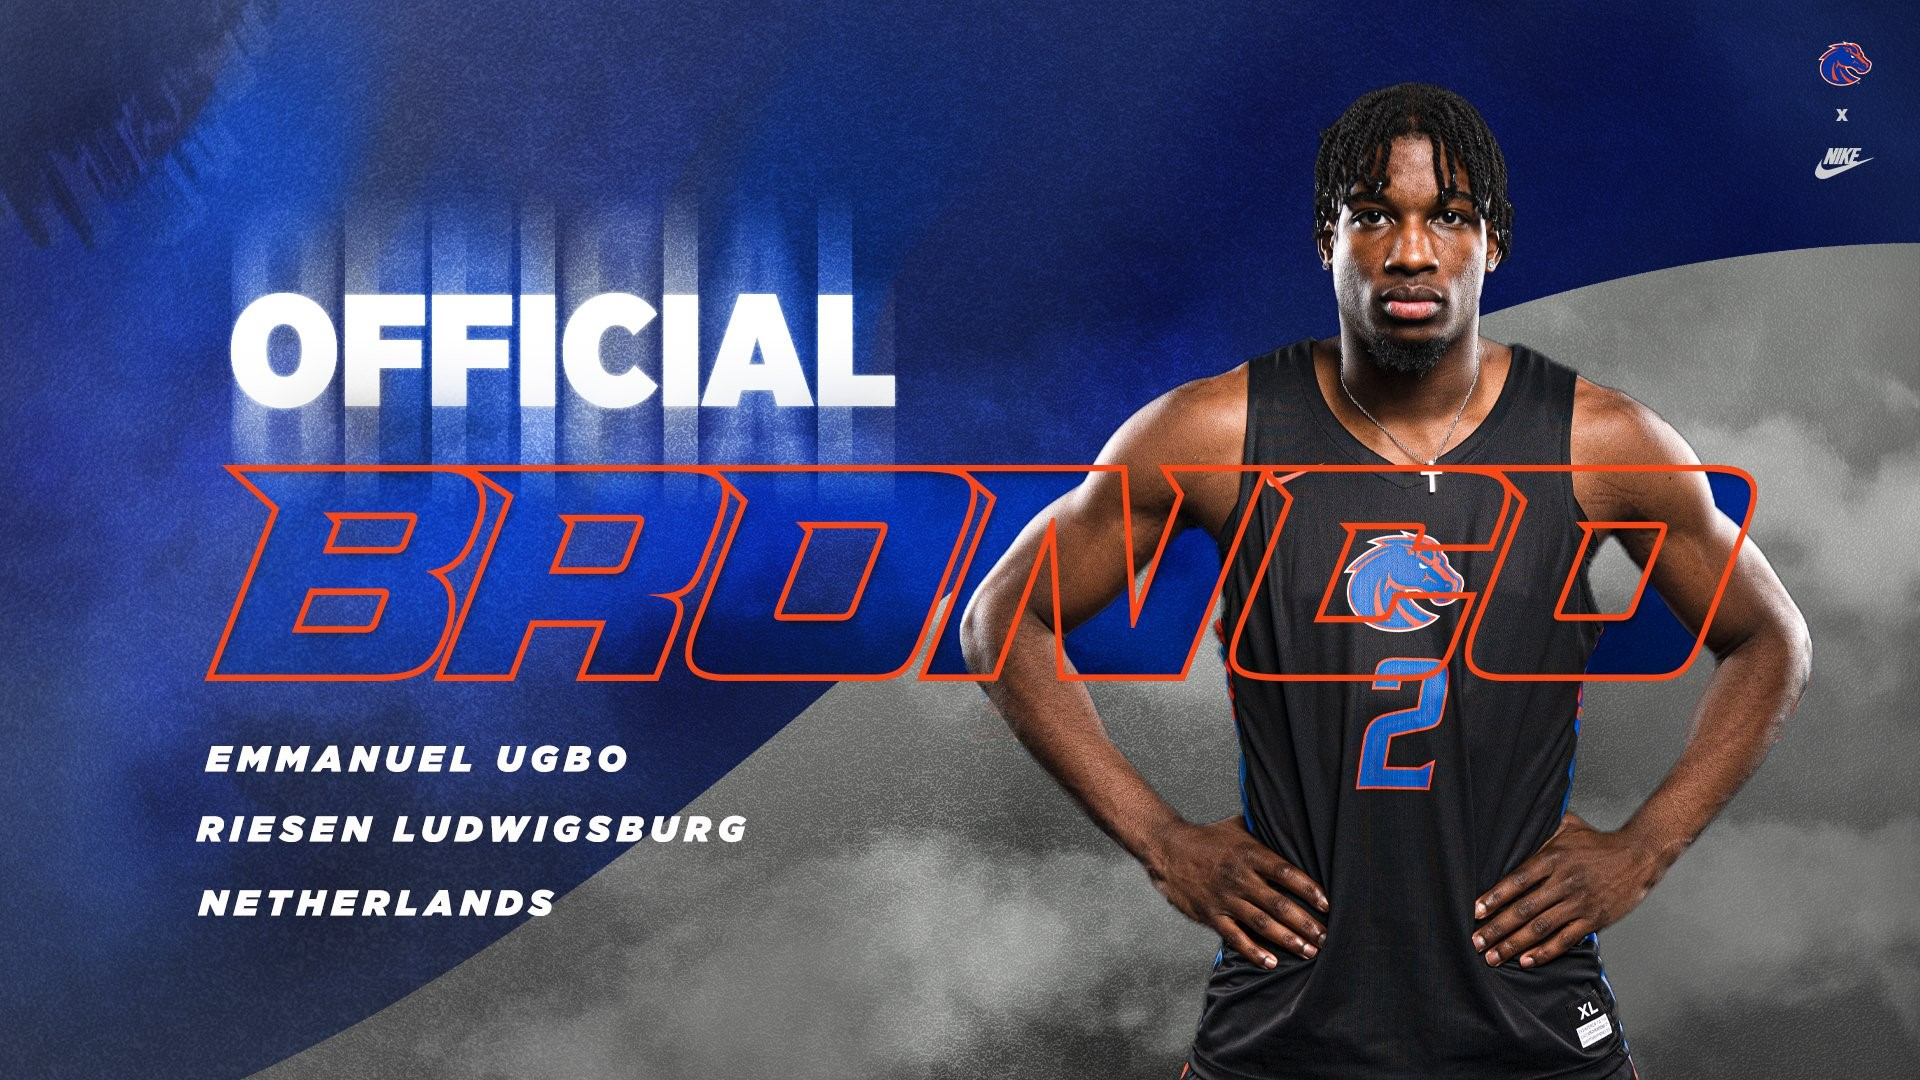 The Dutch signee is a 6-foot-8 forward with a 7-foot-2 wingspan. Ugbo most recently played in Germany's highest basketball league for the Porsche BBA.